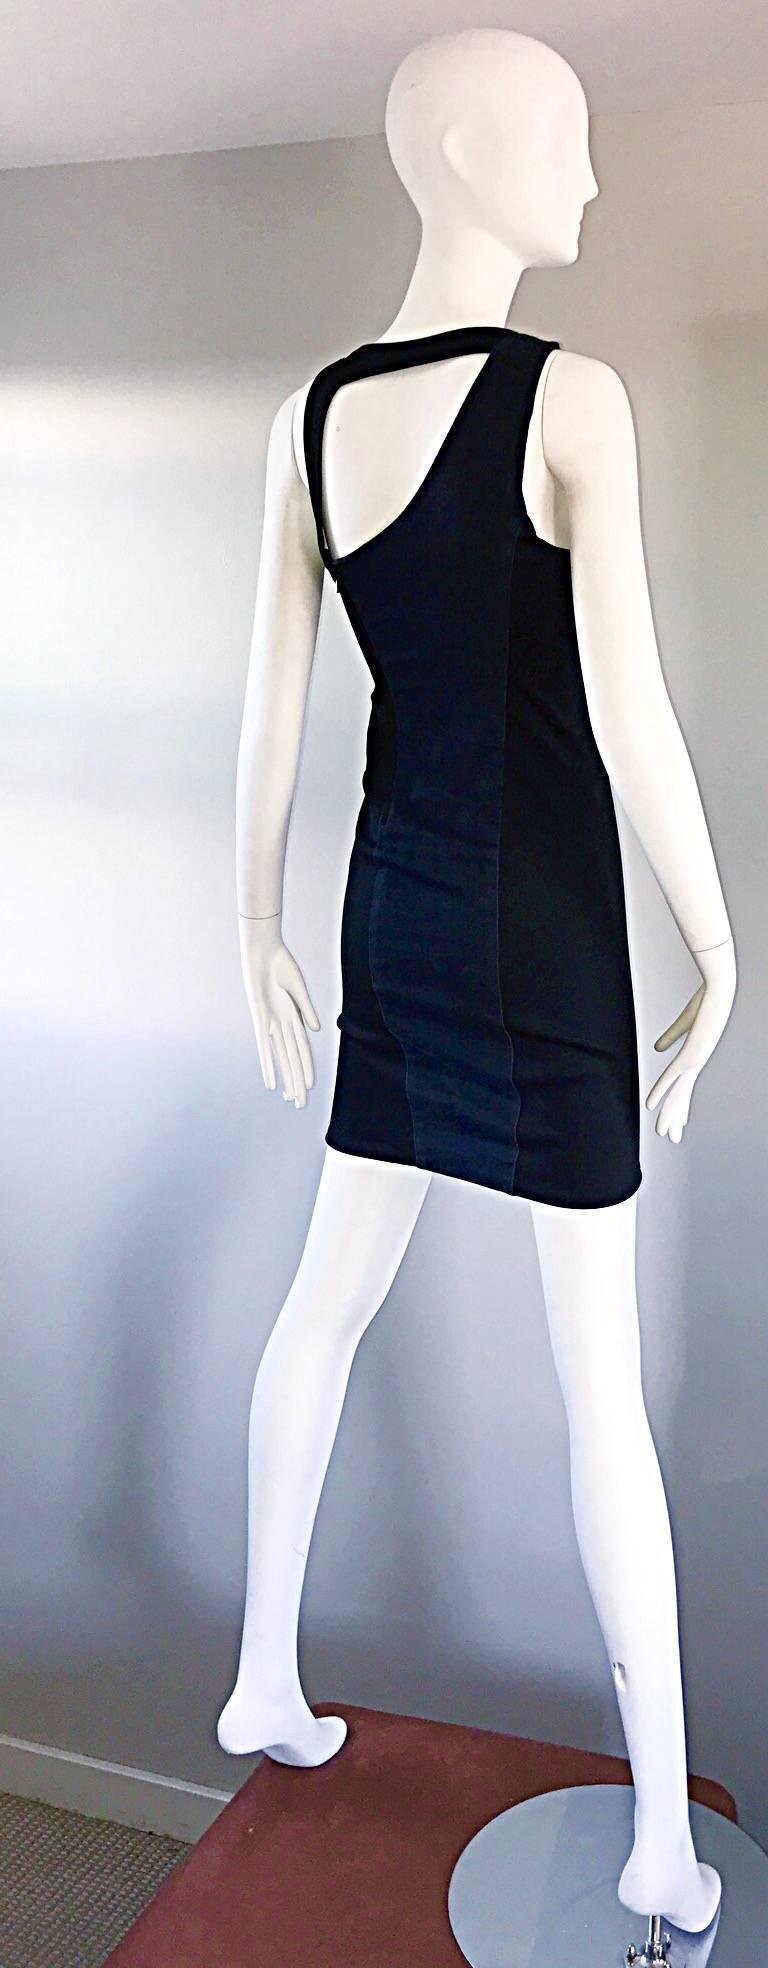 Sexy and rare 90s HELMUT LANG dark blue jean and black bodcon asymmetrical mini dress! Features a denim front, with a black stretchy back. Asymmetrical bust line in the front, and a bondage style cut-out back. Hugs the body in all the right places,